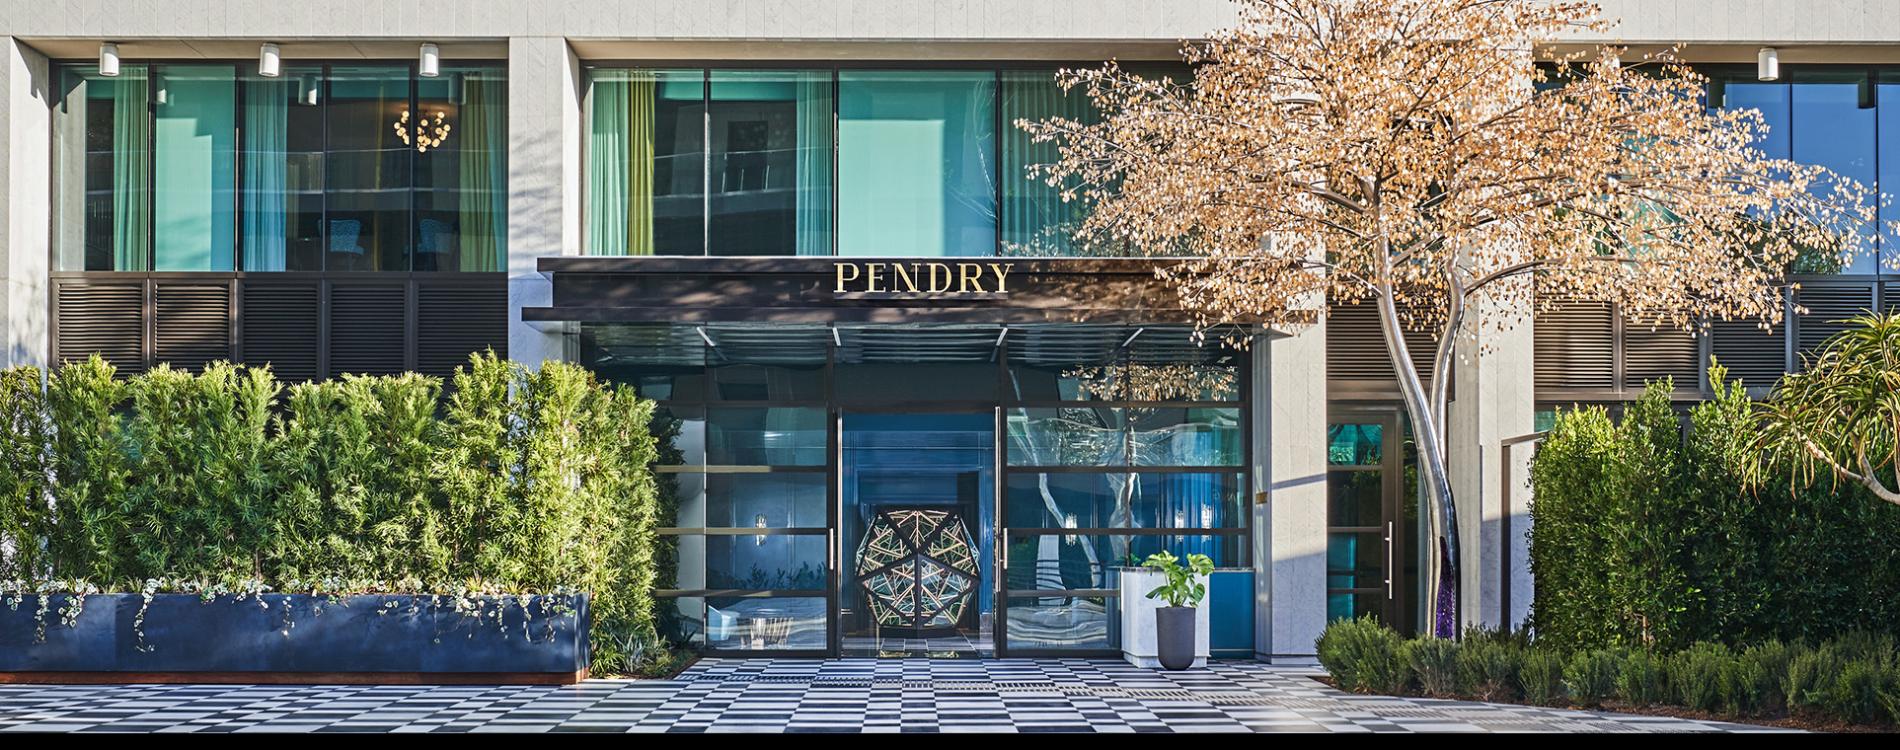 Pendry West Hollywood — Hotel Review